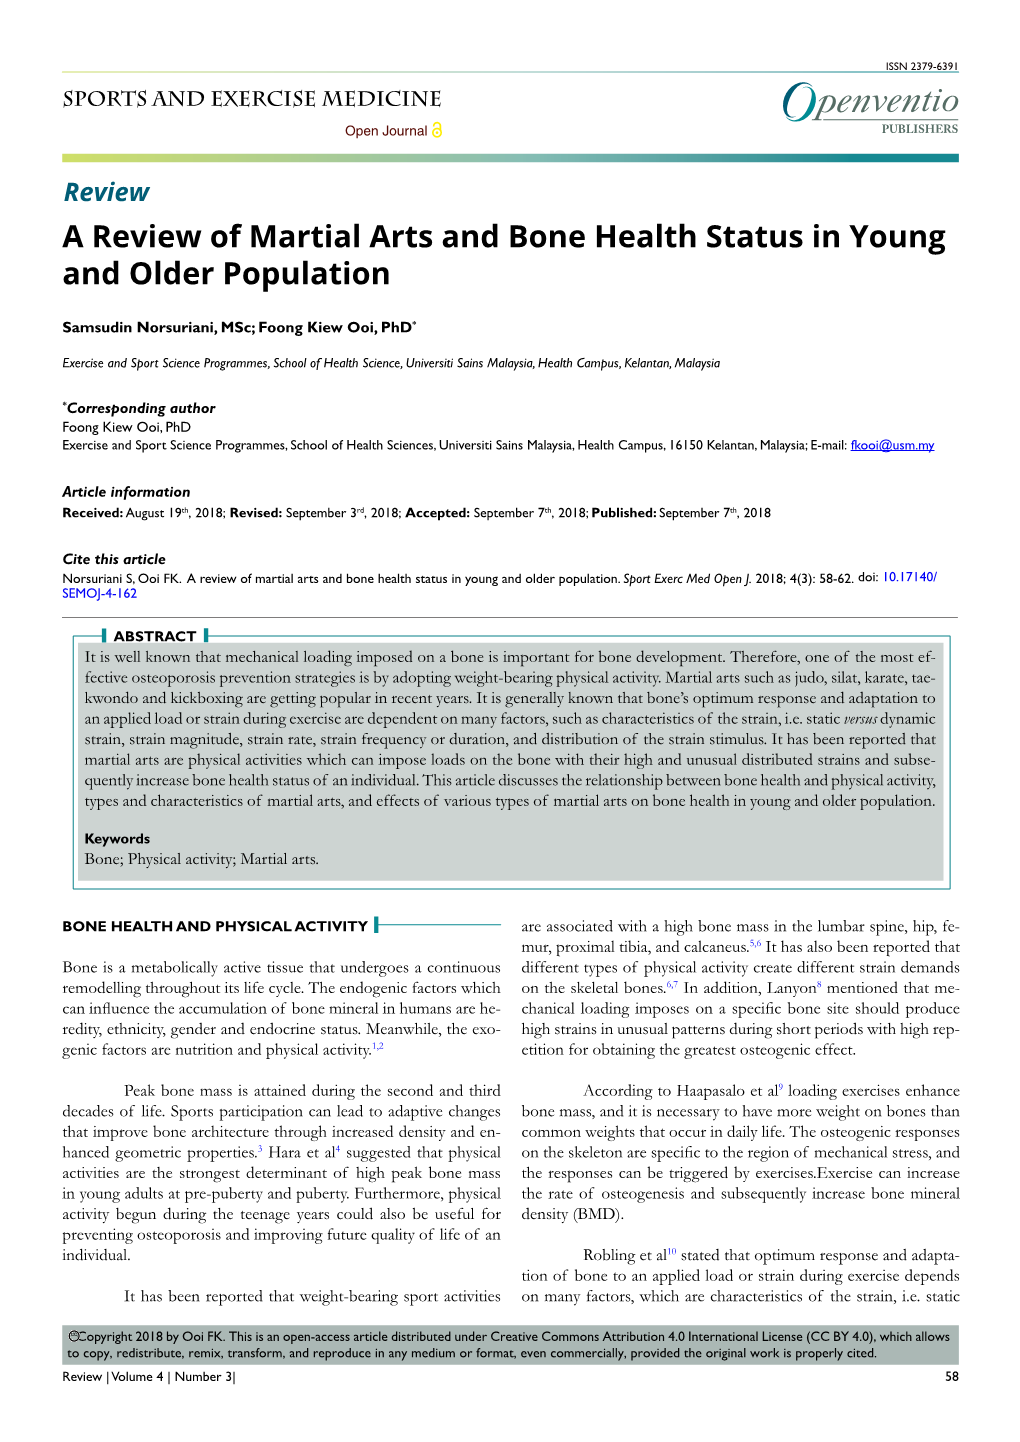 A Review of Martial Arts and Bone Health Status in Young and Older Population